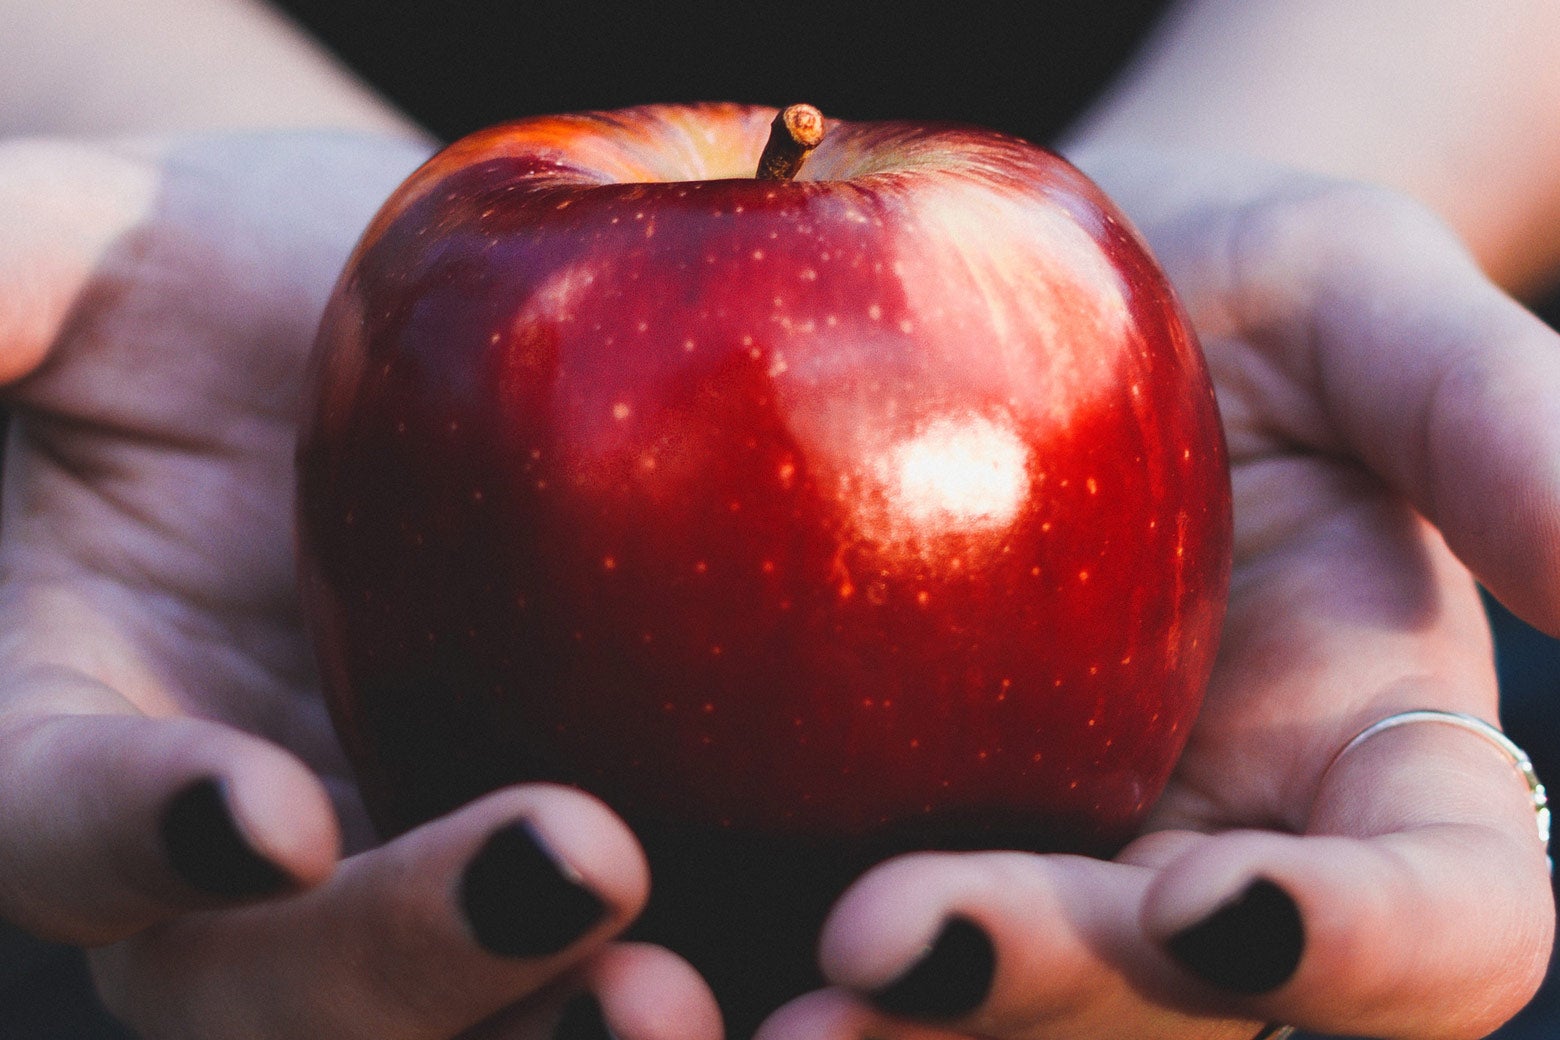 A Red Delicious apple held in someone's hands.